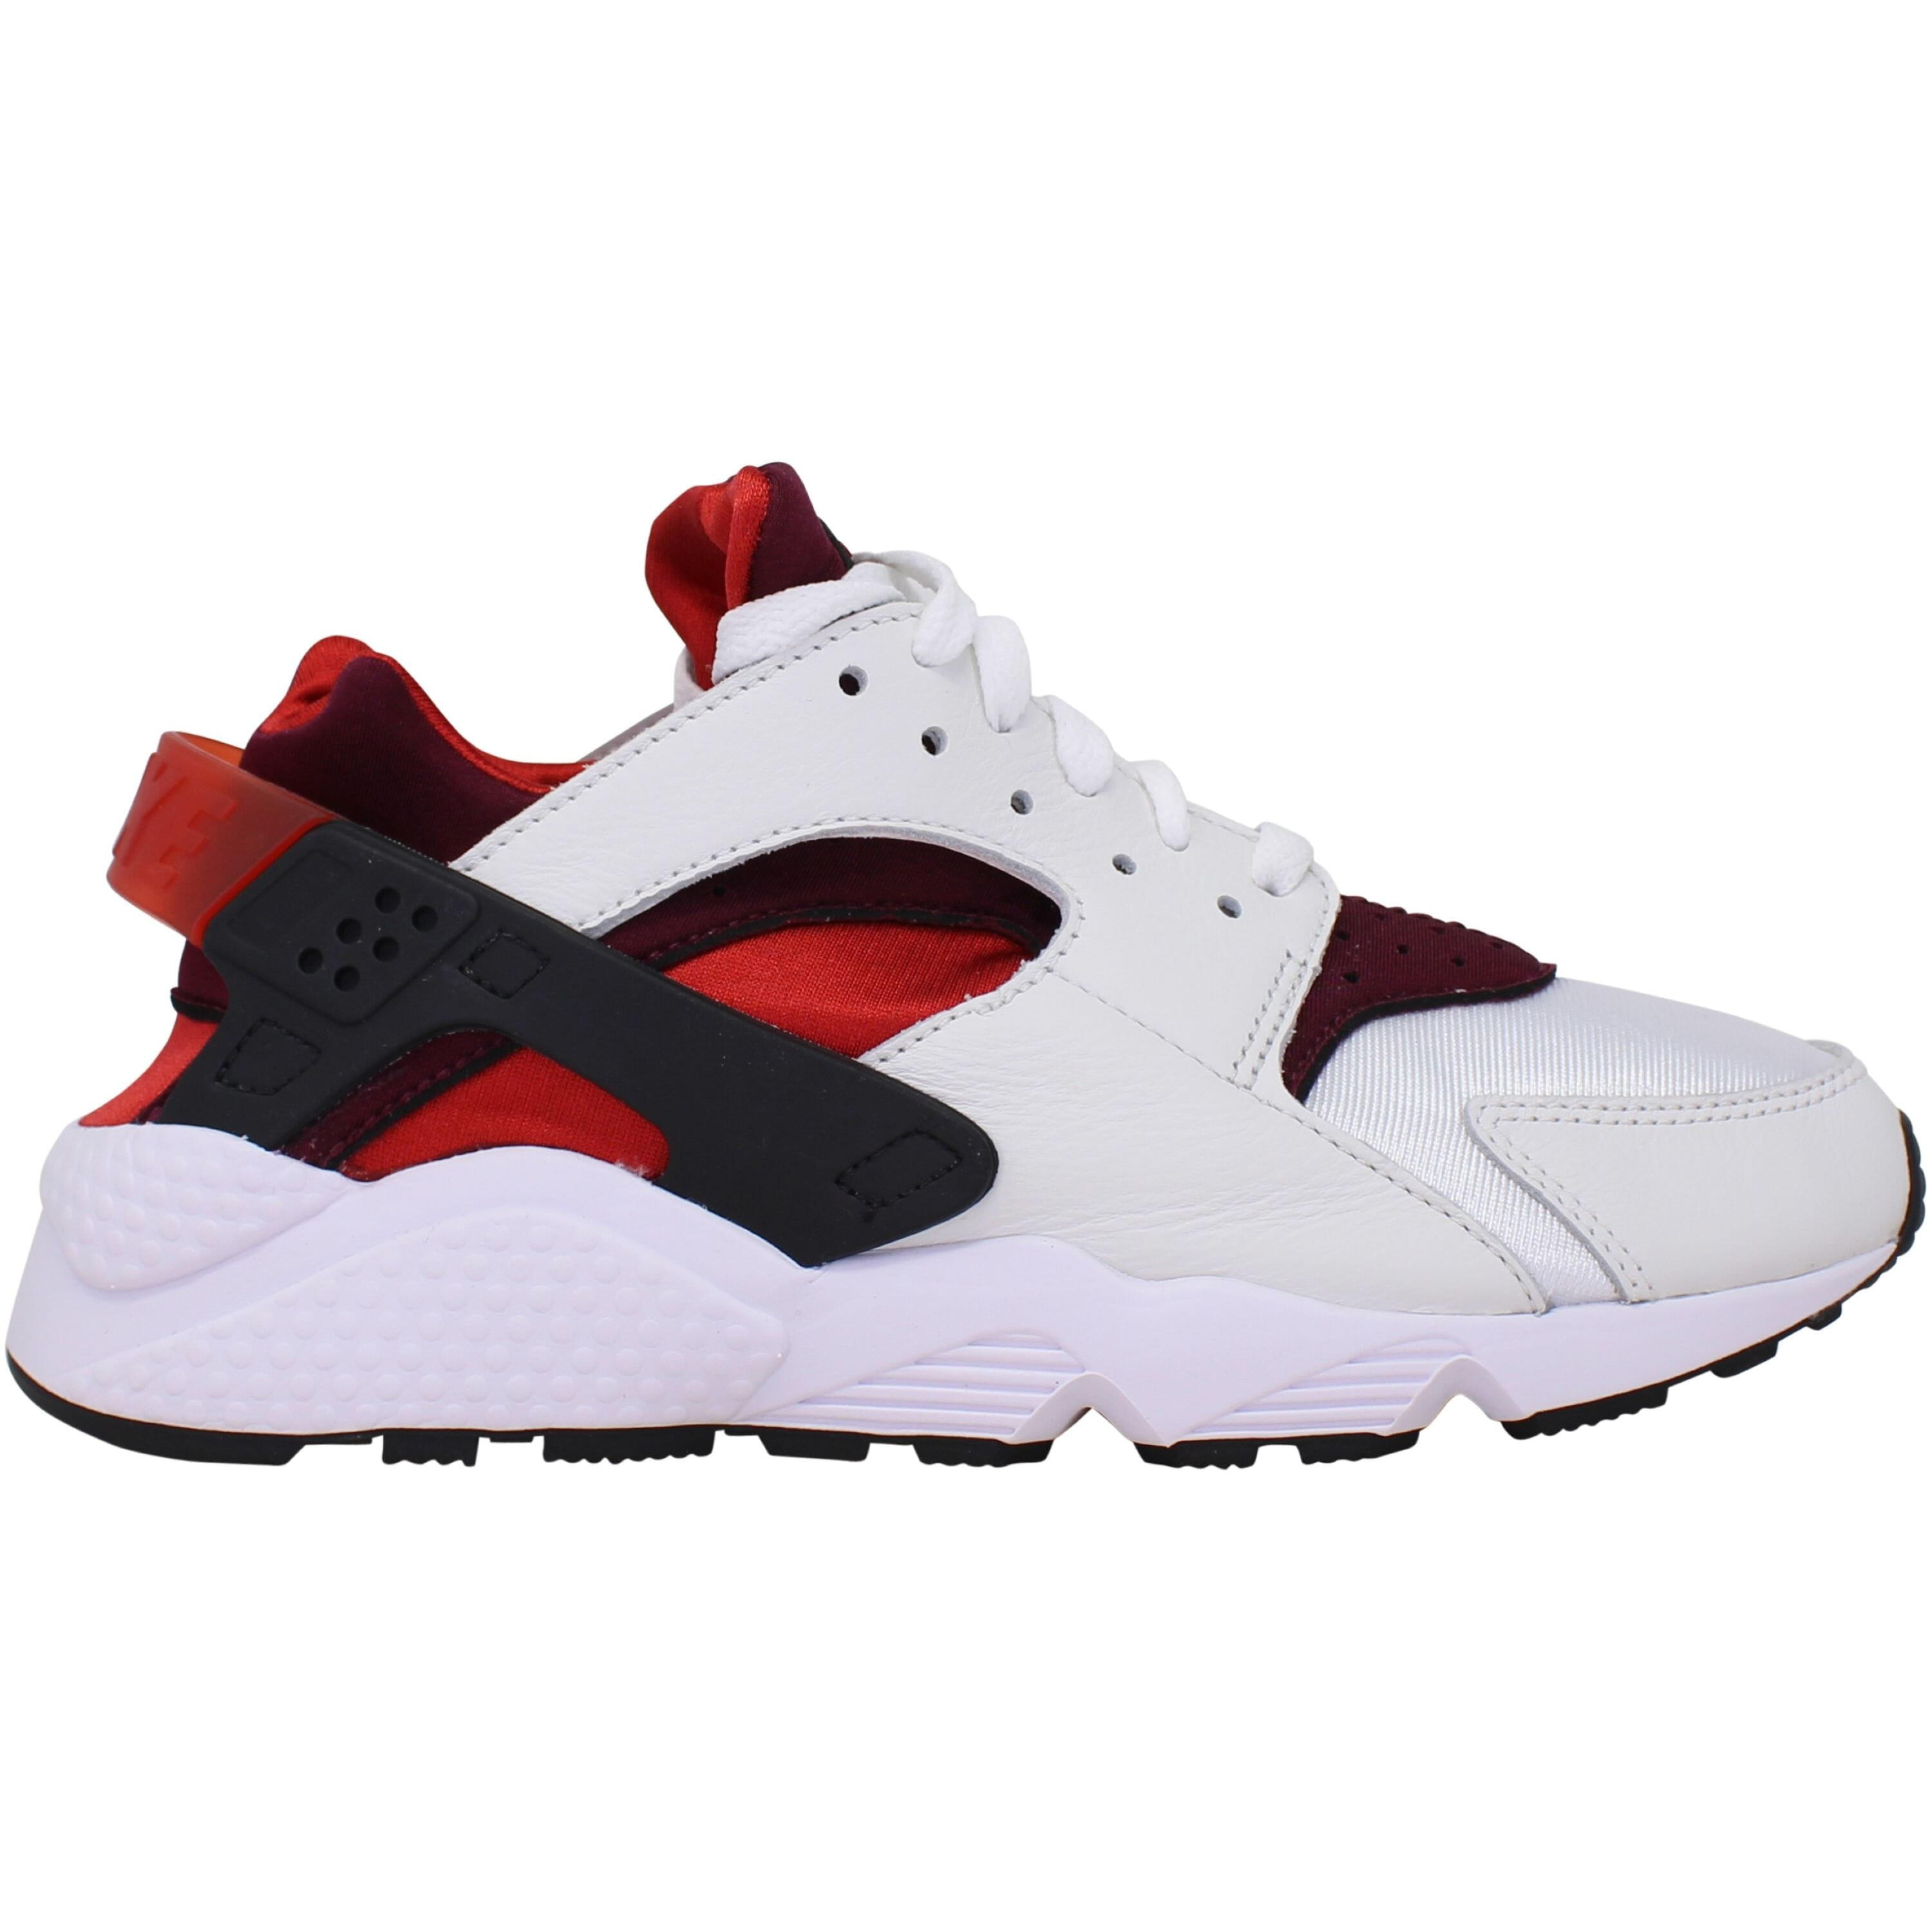 red huaraches mens size 8